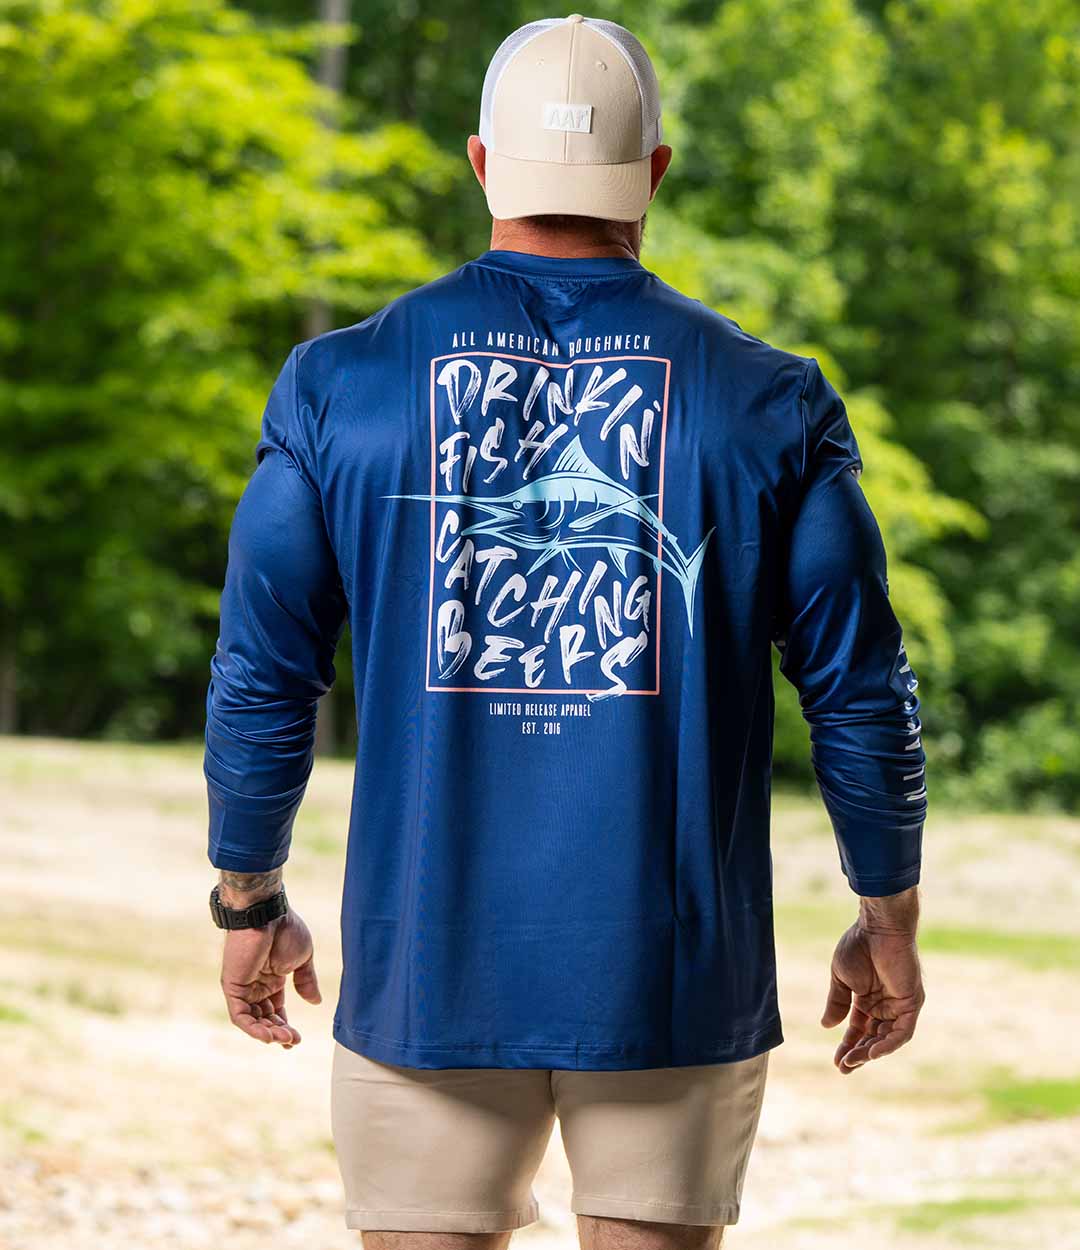 Catching Beers Fishing Shirt - All American Roughneck